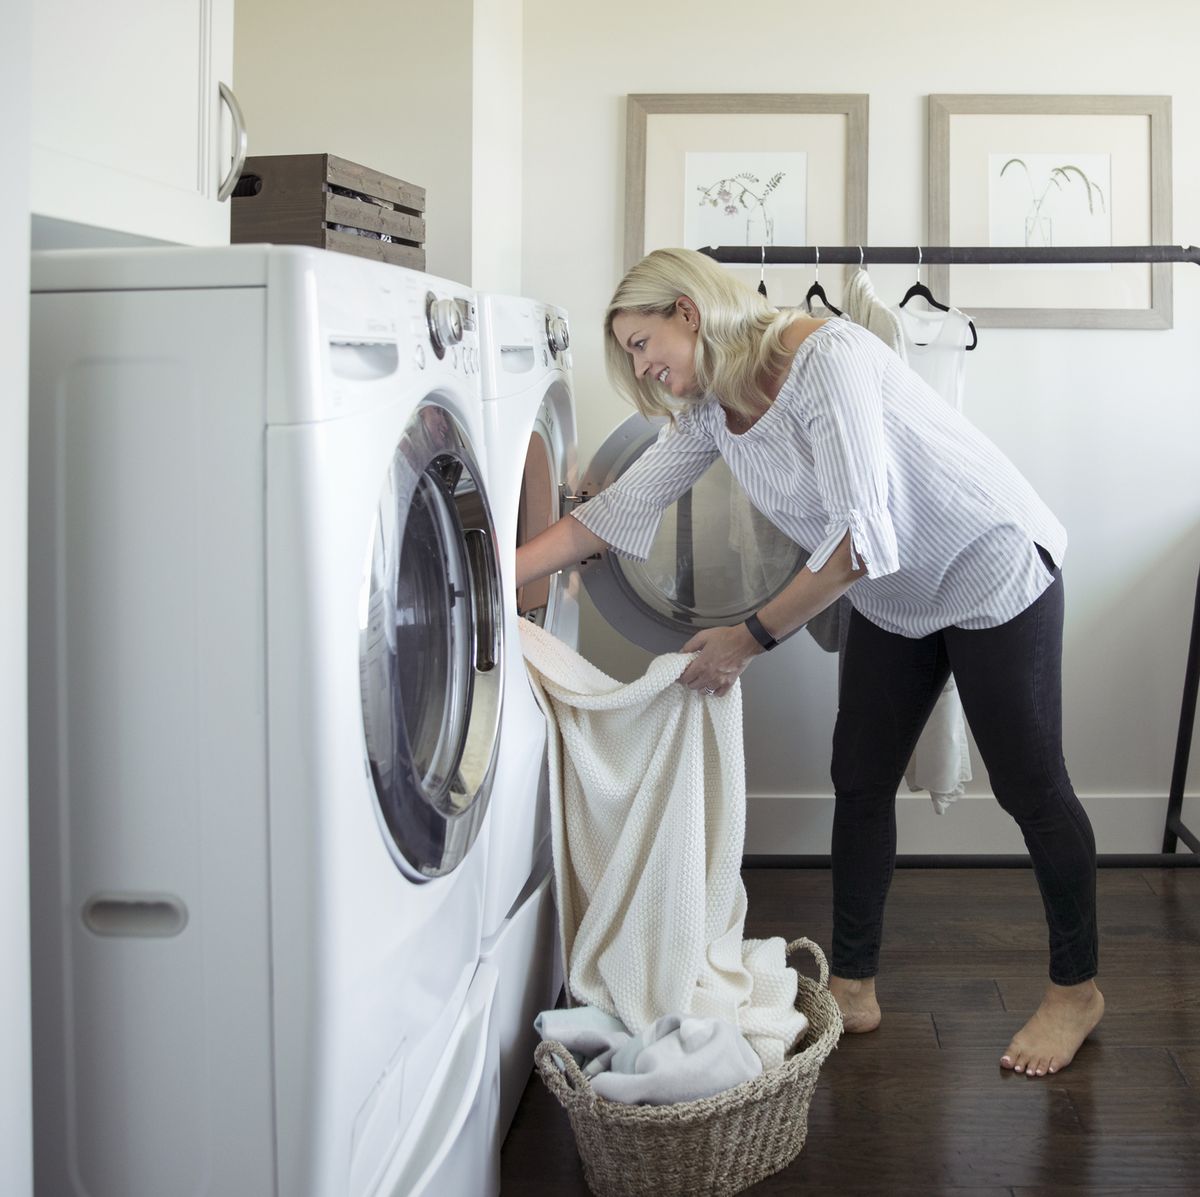 Woman removing laundry from dryer in laundry room